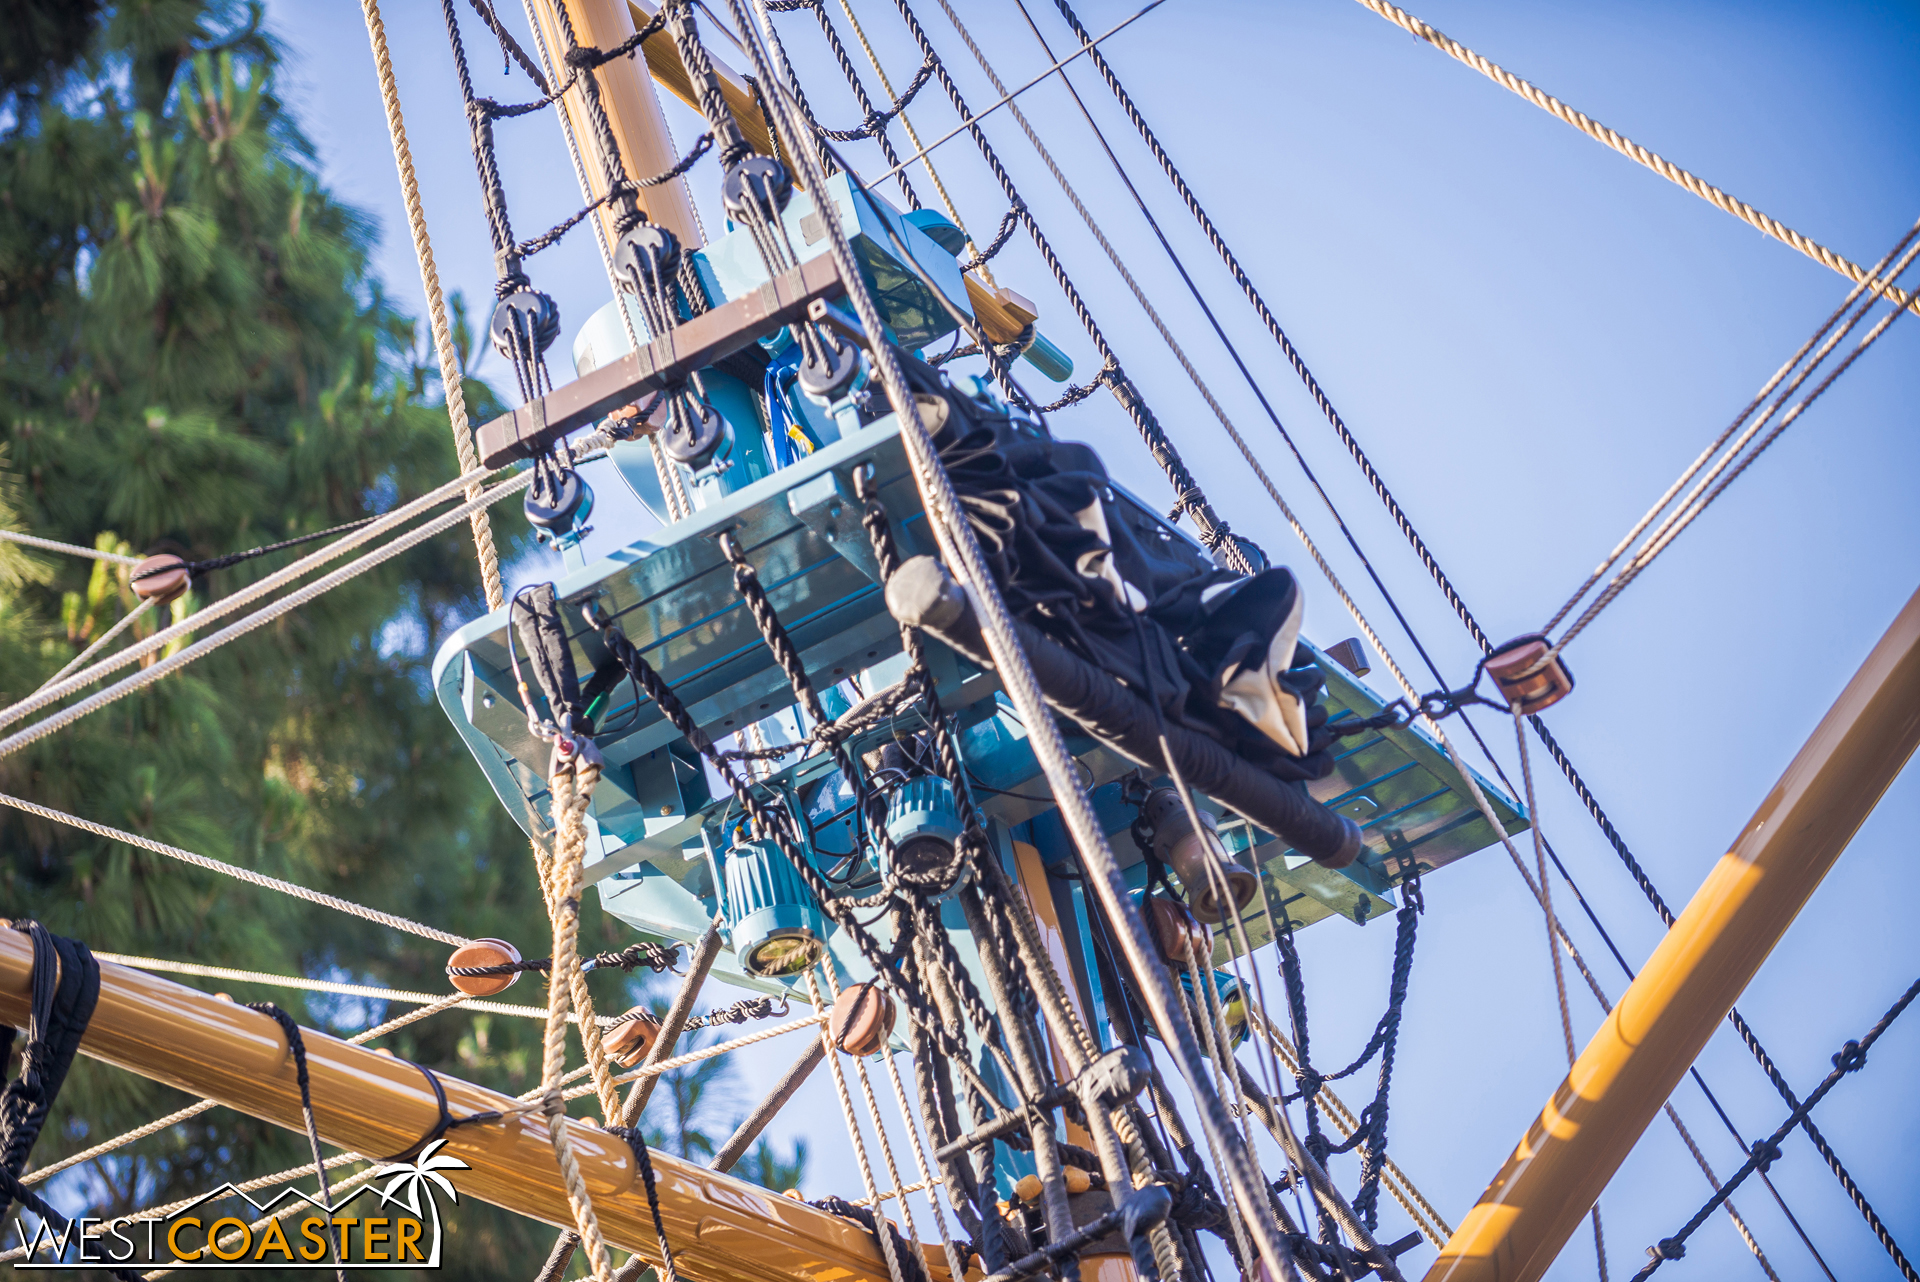  Lighting has been cleverly hidden in with the mast and sort of camouflaged behind the rigging. 